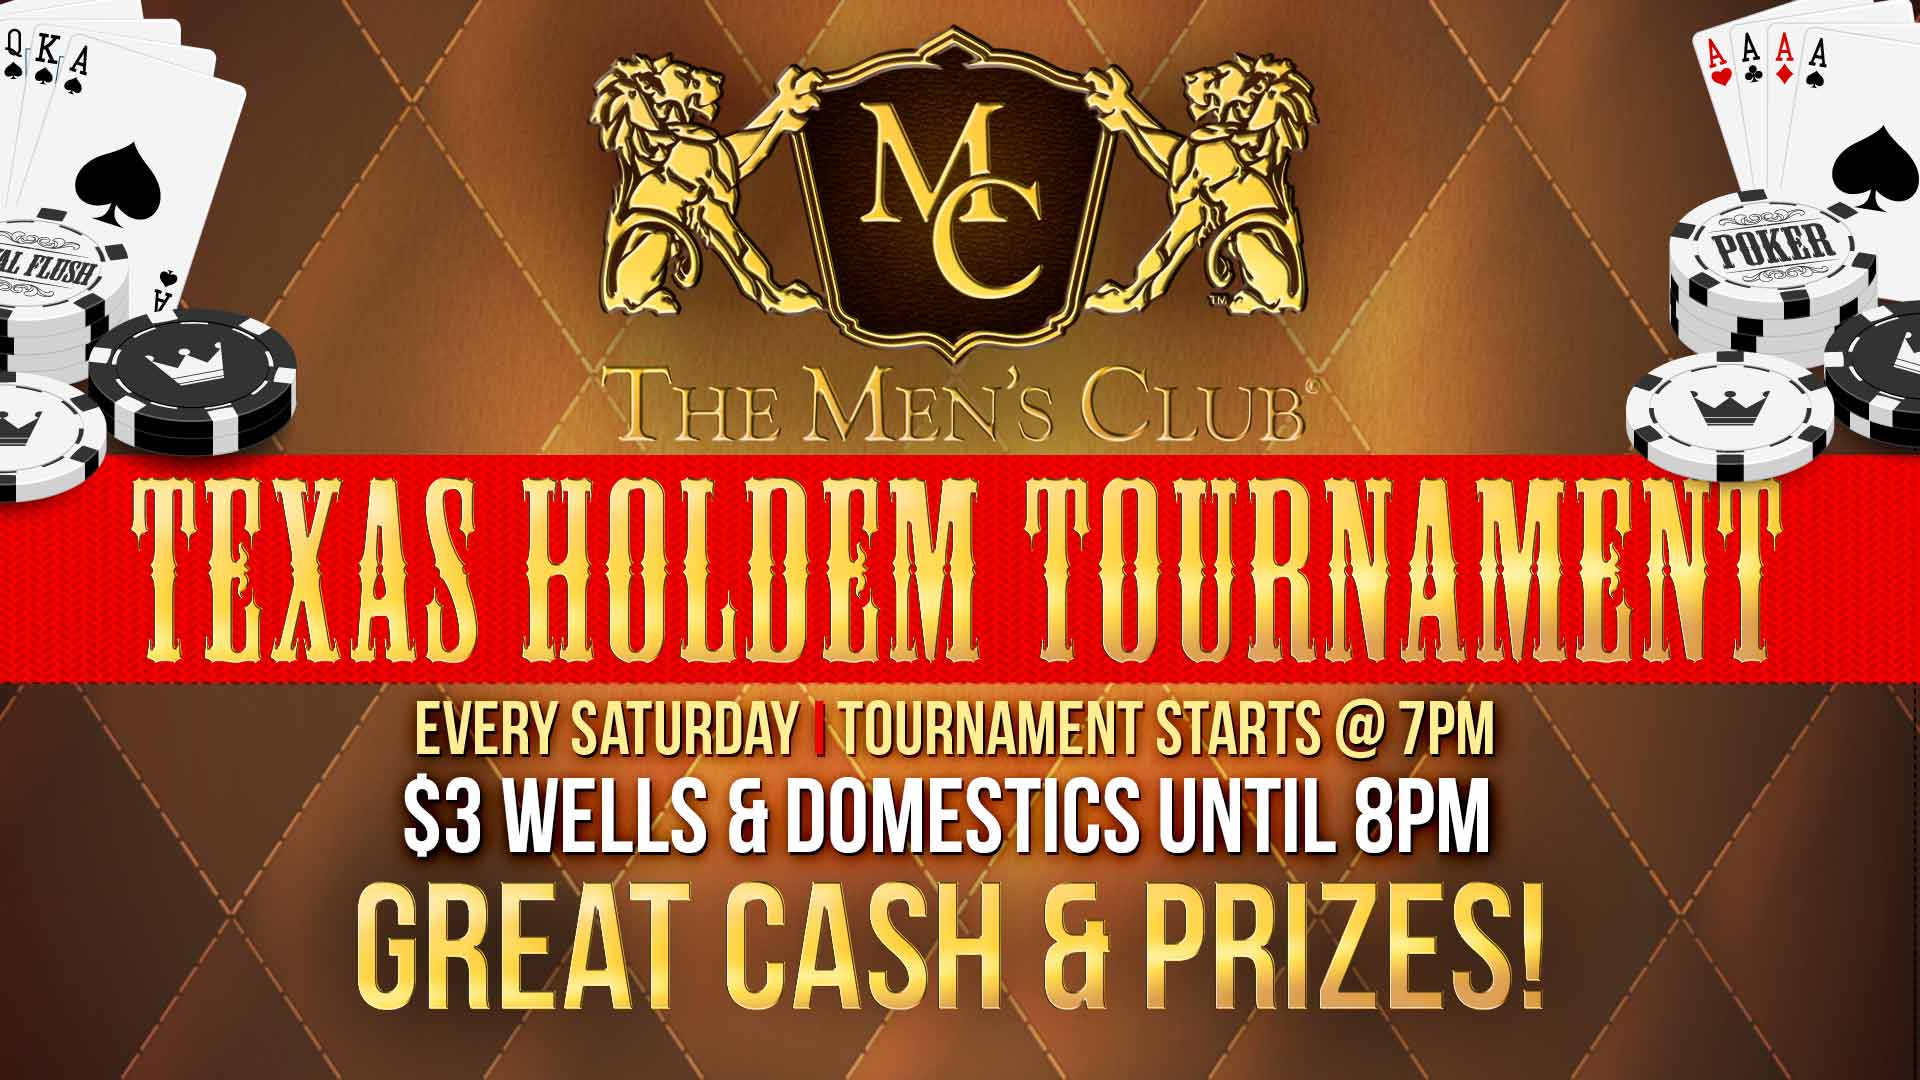 image of poker cards and chips for Texas Holdem Tournaments at The Men's Club of Dallas